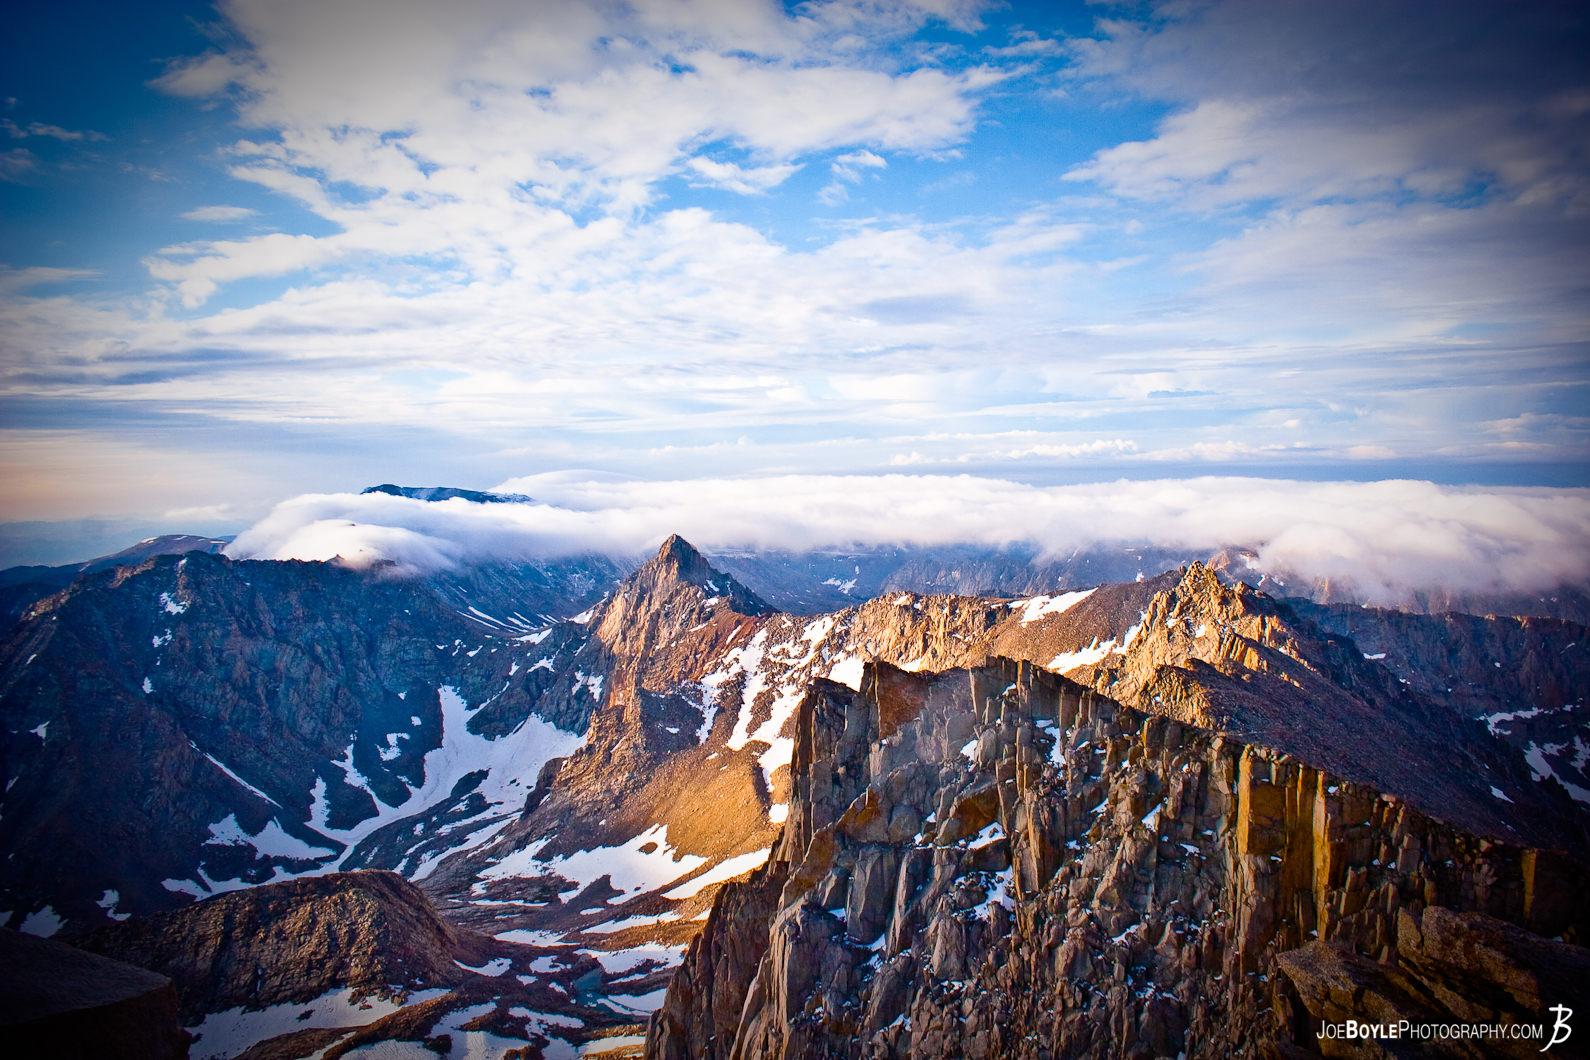 This is the view from on top of Mt. Whitney during a sunrise.